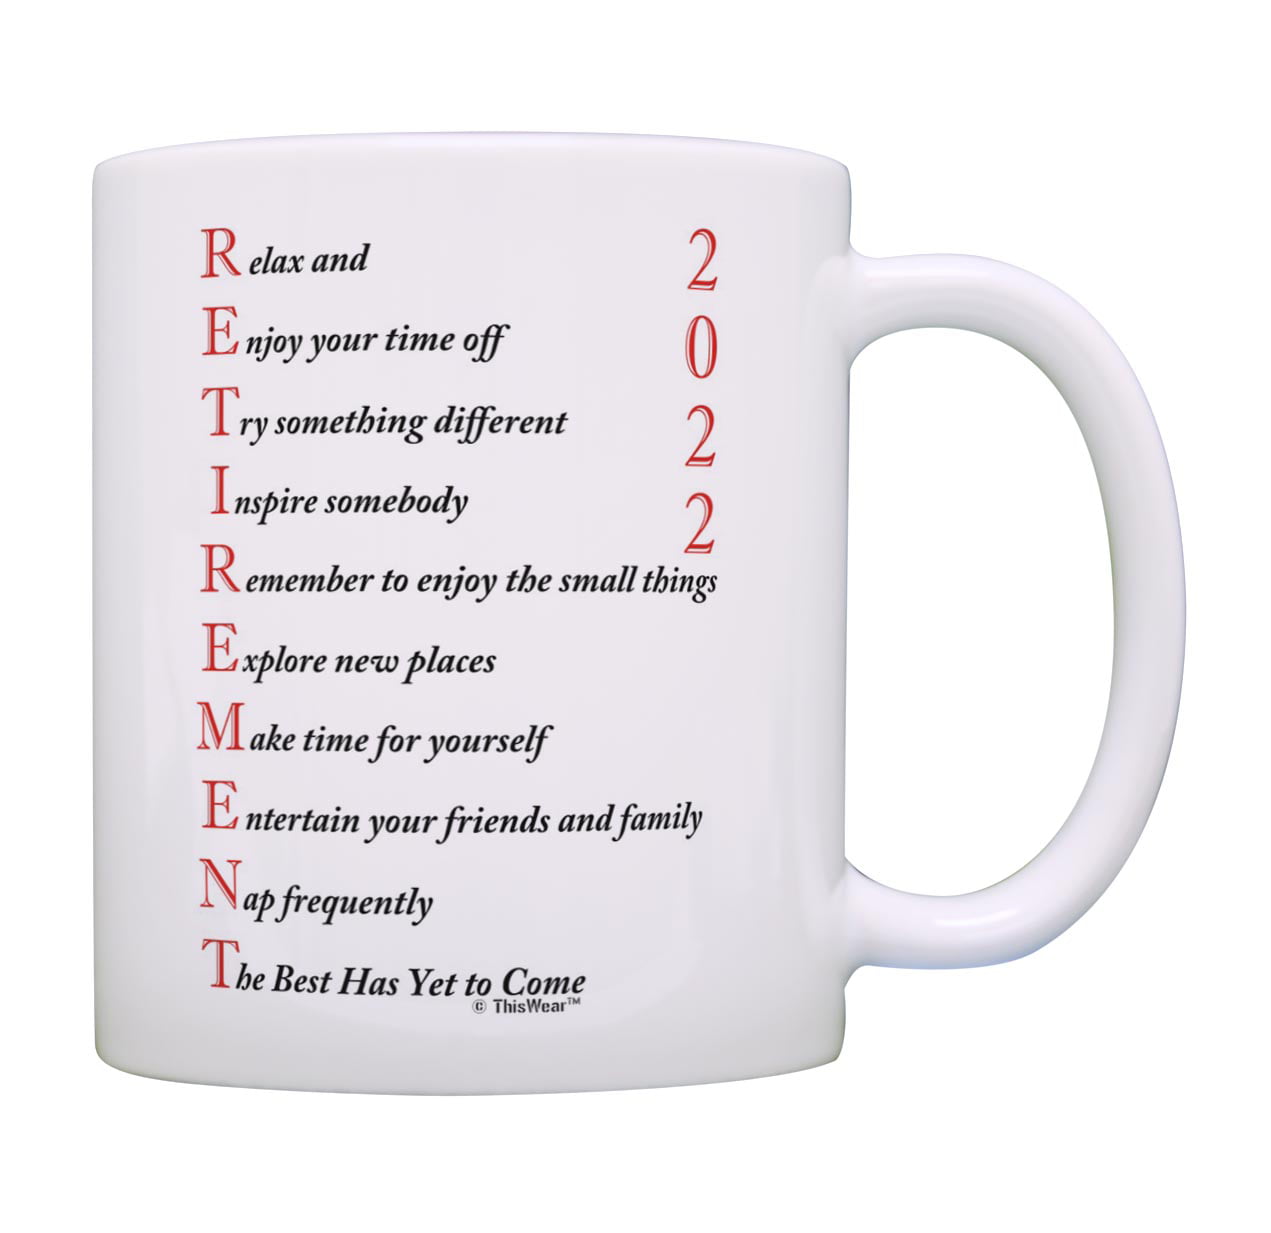 TO DO LIST Coffee Mug Funny Gift Idea Start The Morning with a Cuppa Joe and a Good Poop Then Be Awesome All Day Christmas Holiday Birthday Retirement Present 11oz Ceramic Tea Cup Digibuddha DM0565